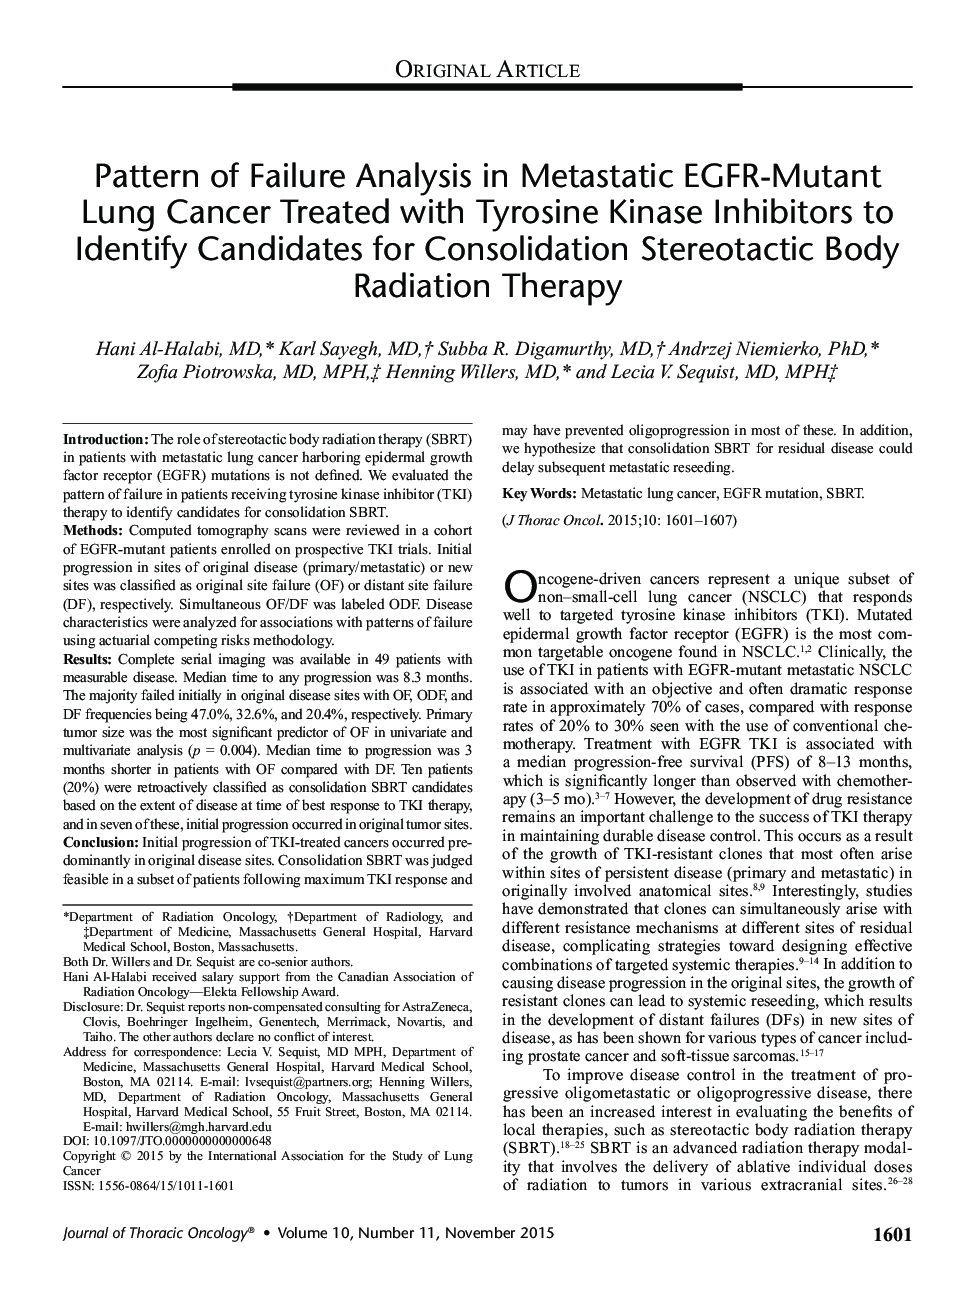 Pattern of Failure Analysis in Metastatic EGFR-Mutant Lung Cancer Treated with Tyrosine Kinase Inhibitors to Identify Candidates for Consolidation Stereotactic Body Radiation Therapy